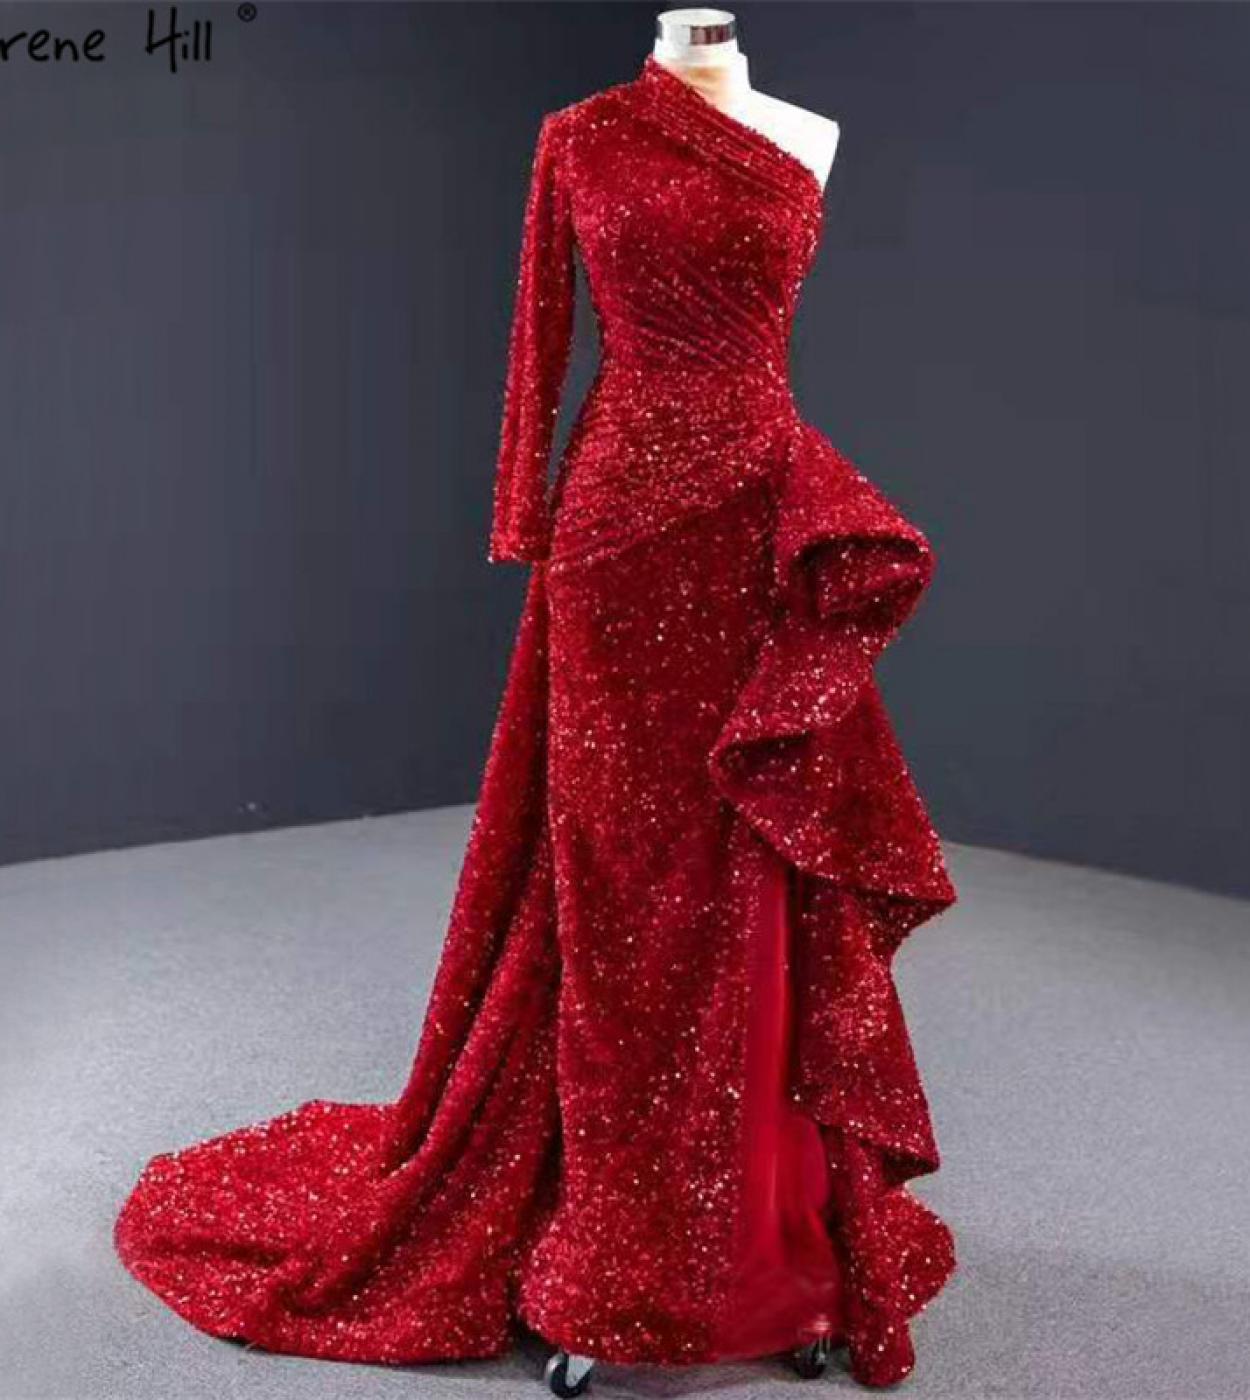 Dubai Luxury One Shoulder Red Evening Dresses  Sequined Sparkle Mermaid  Fromal Dress Serene Hill Hm67056  Evening Dress